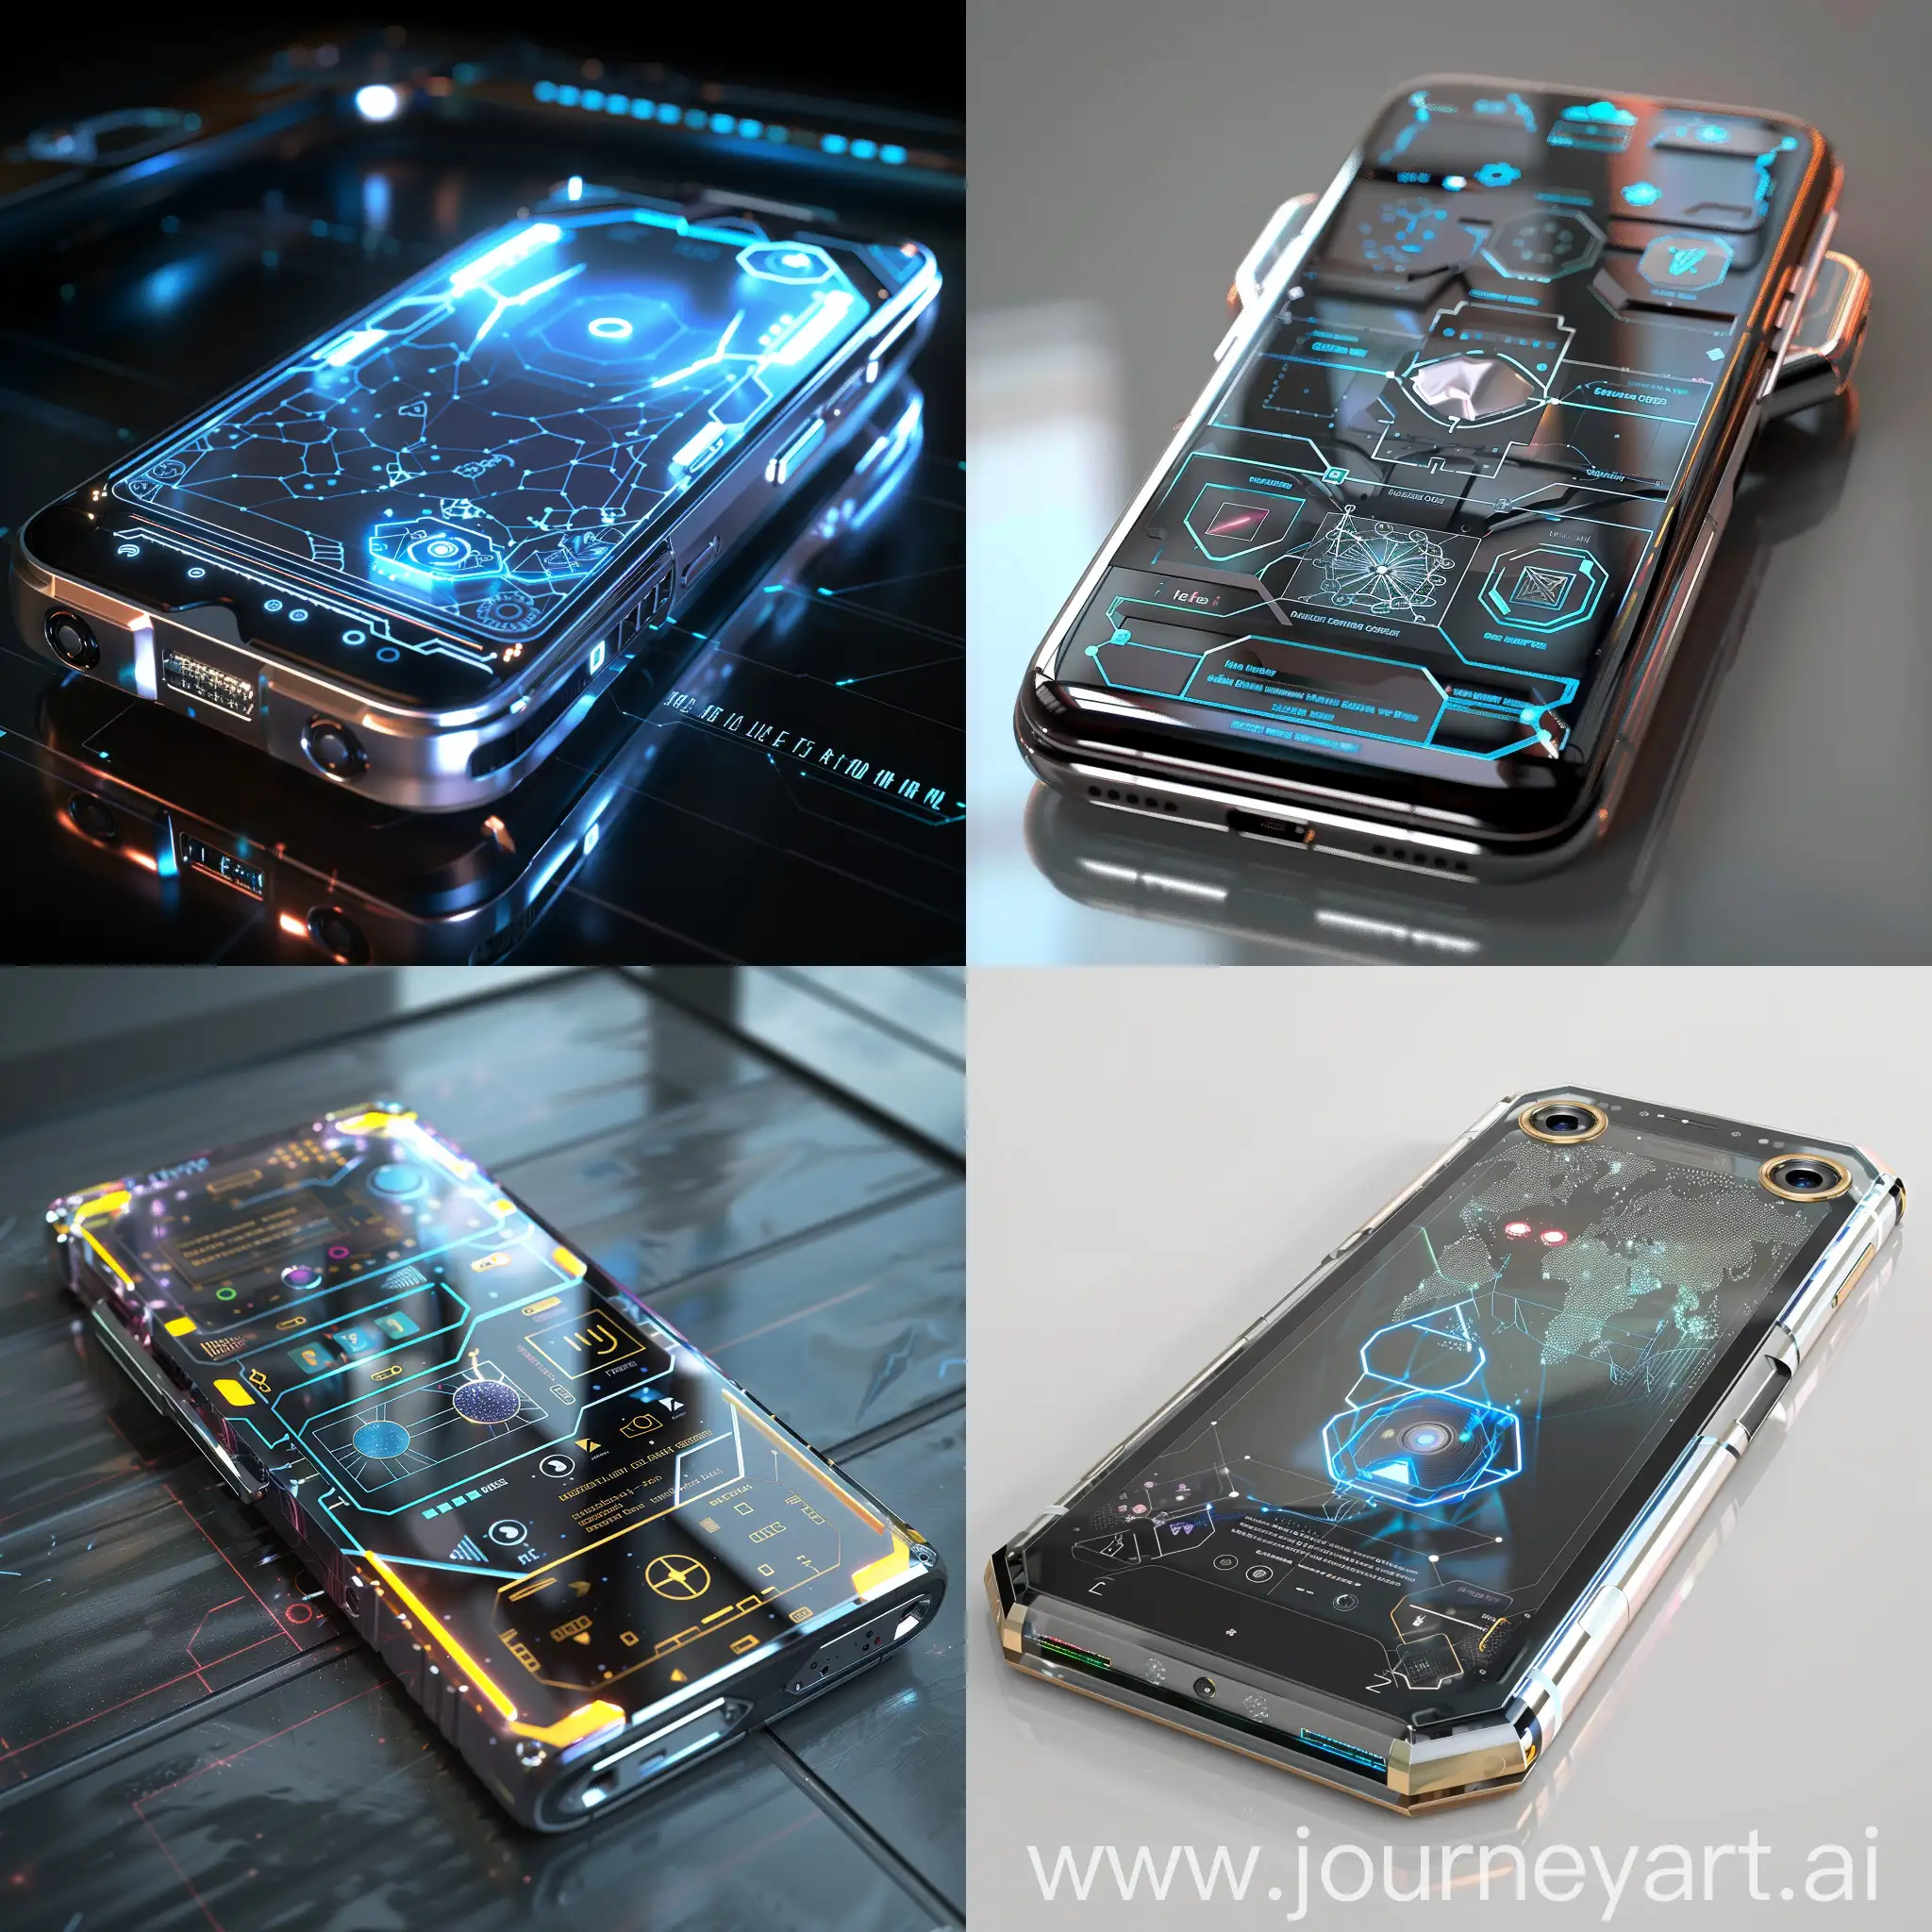 Futuristic-Smartphone-with-Graphene-Batteries-and-Holographic-Display